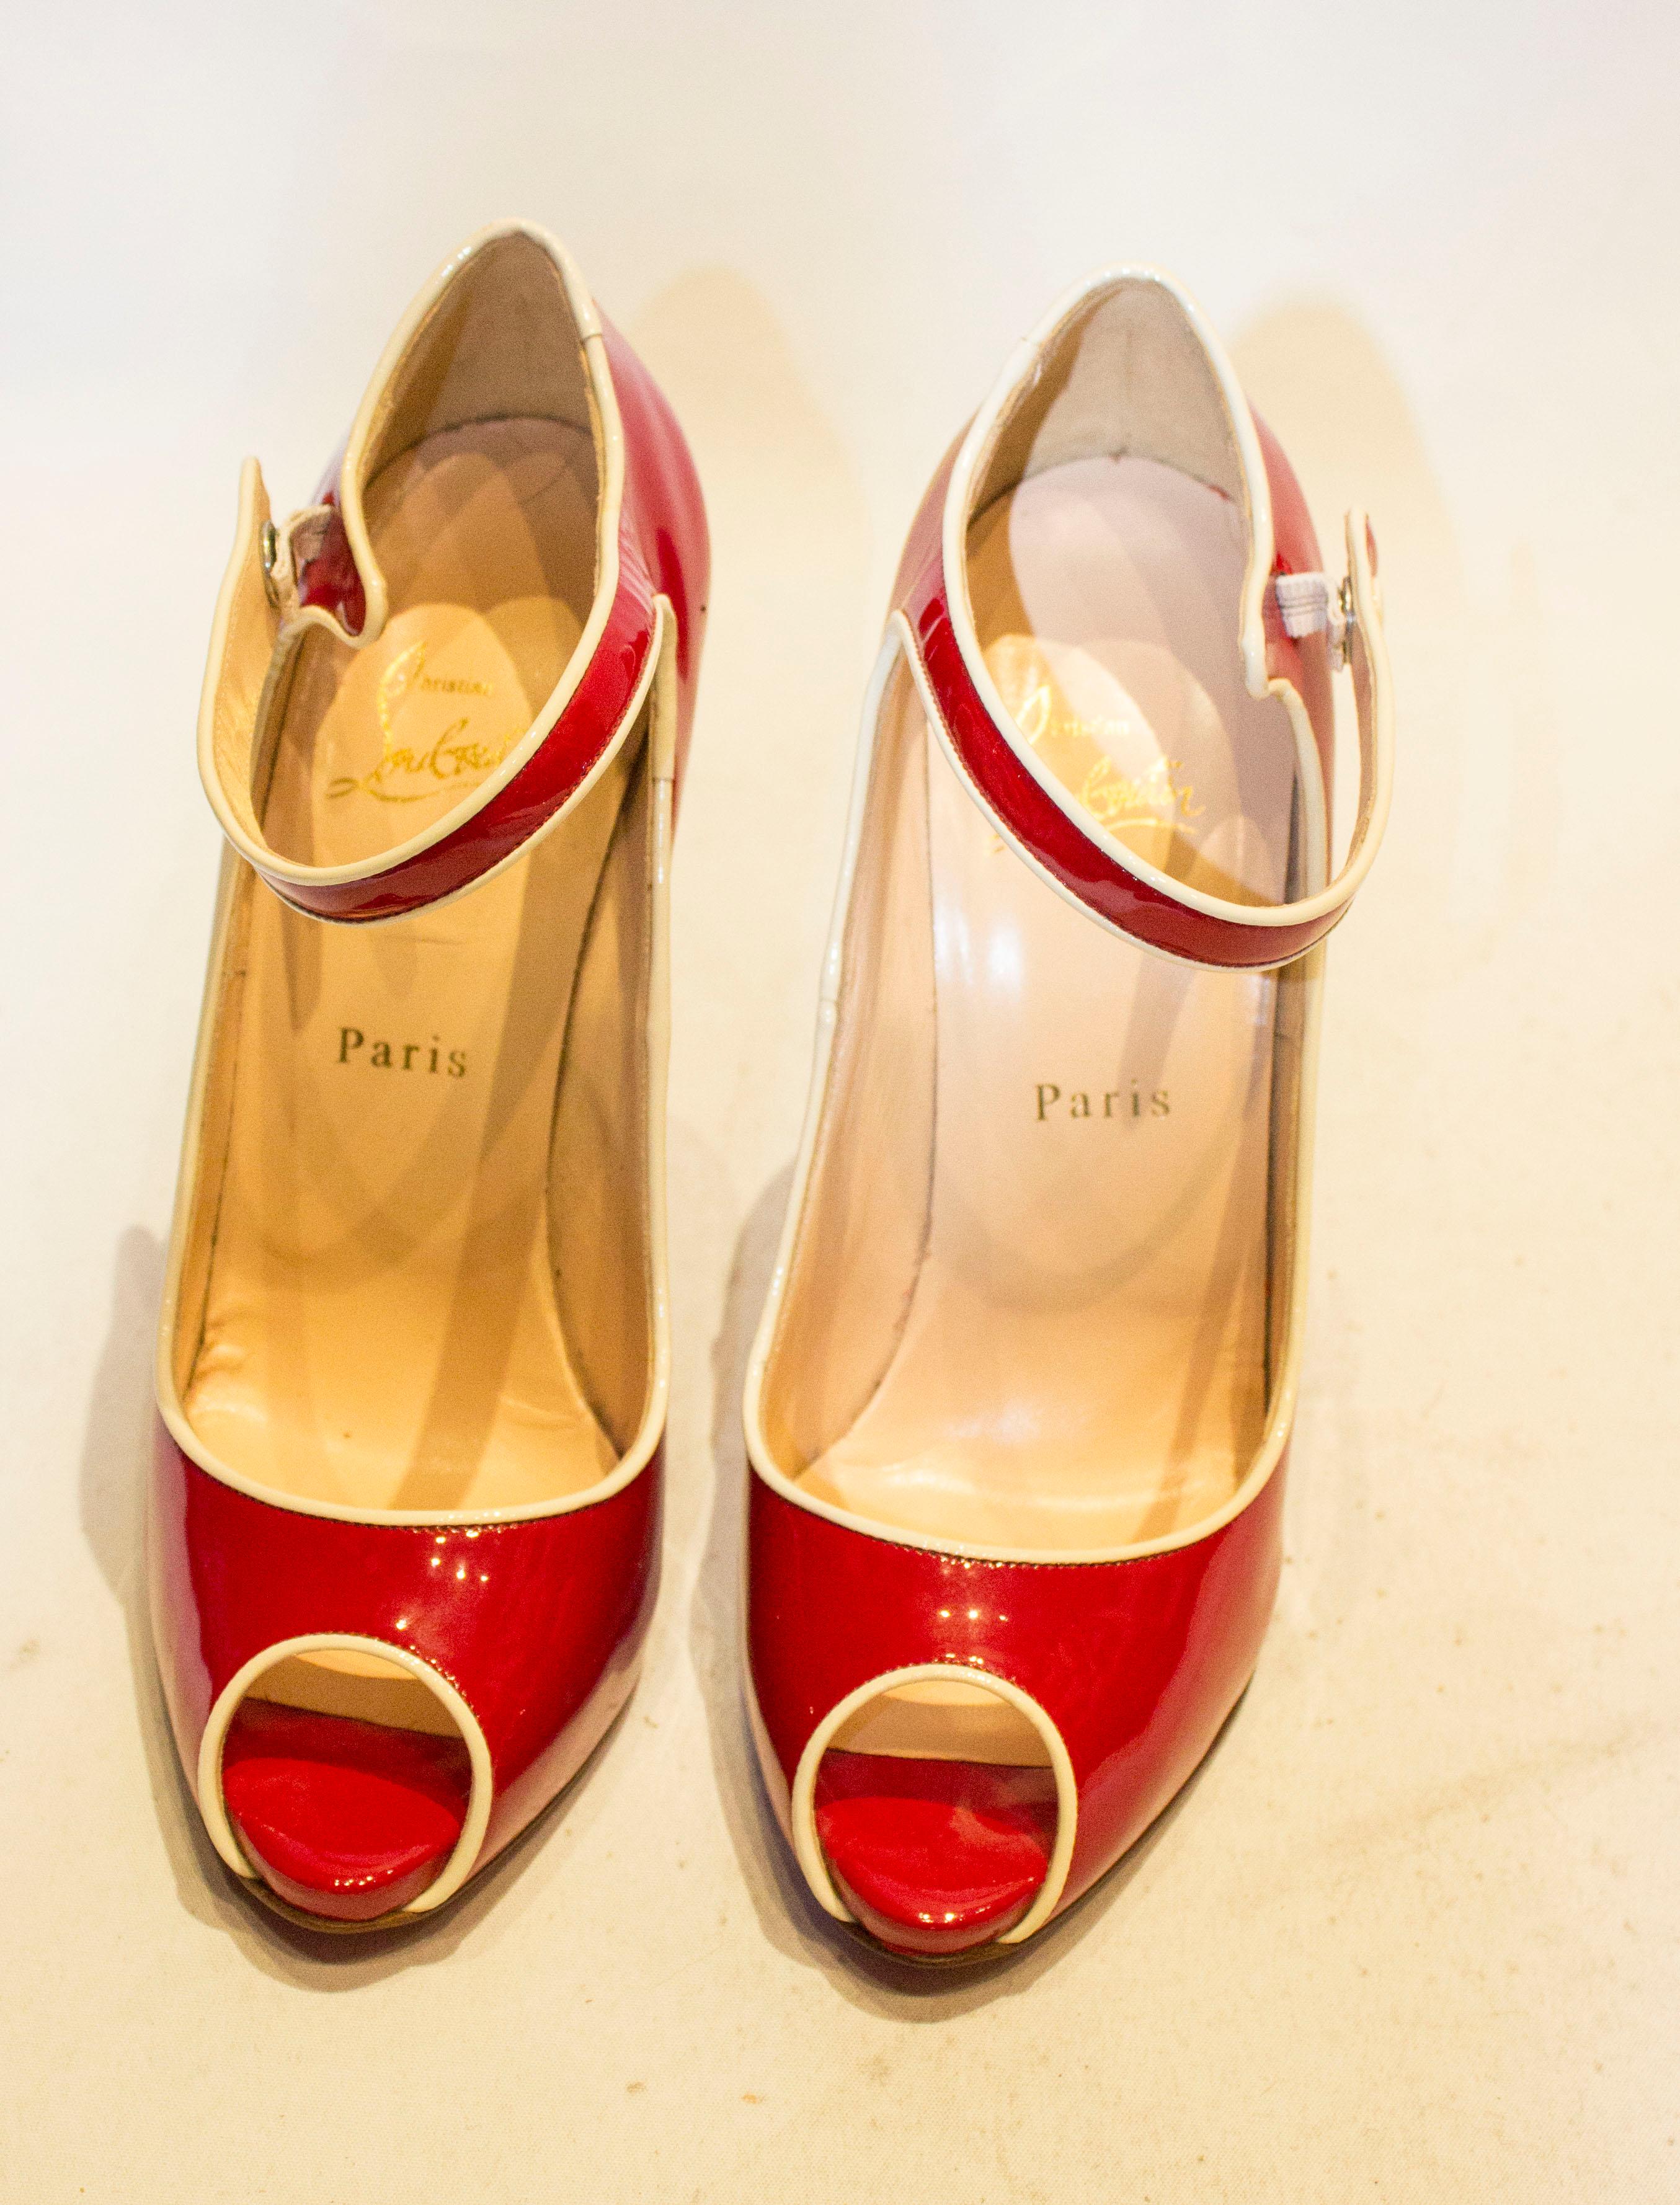 A fund pair of shoes by Christian Louboutin . The shoes are in red patent leather with a cream trim, peep toes and ankle strap. Size 38'', heel height 5''.